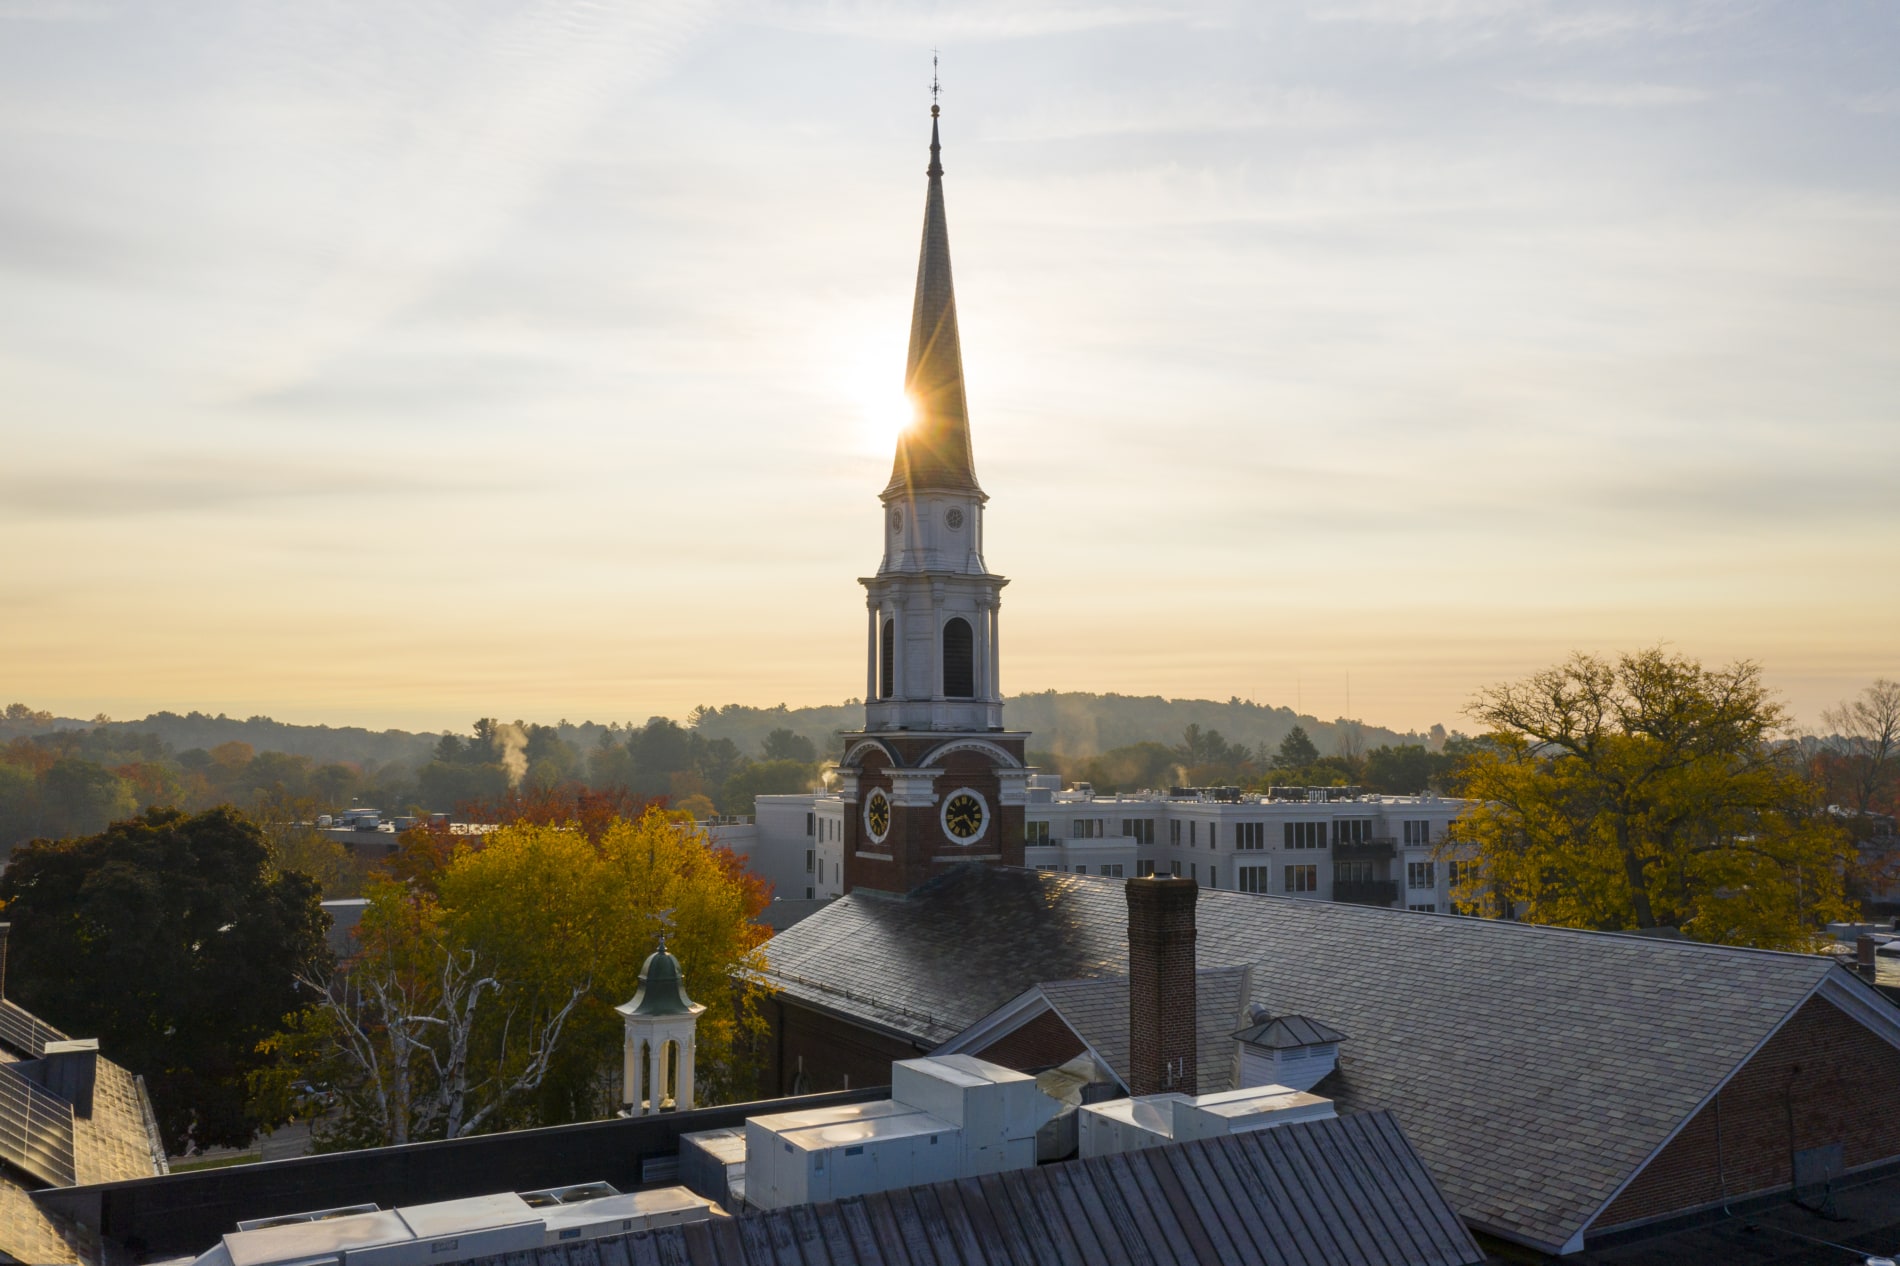 The steeple of the Wellesley Village Church towers over downtown Wellesley as the sun rises.